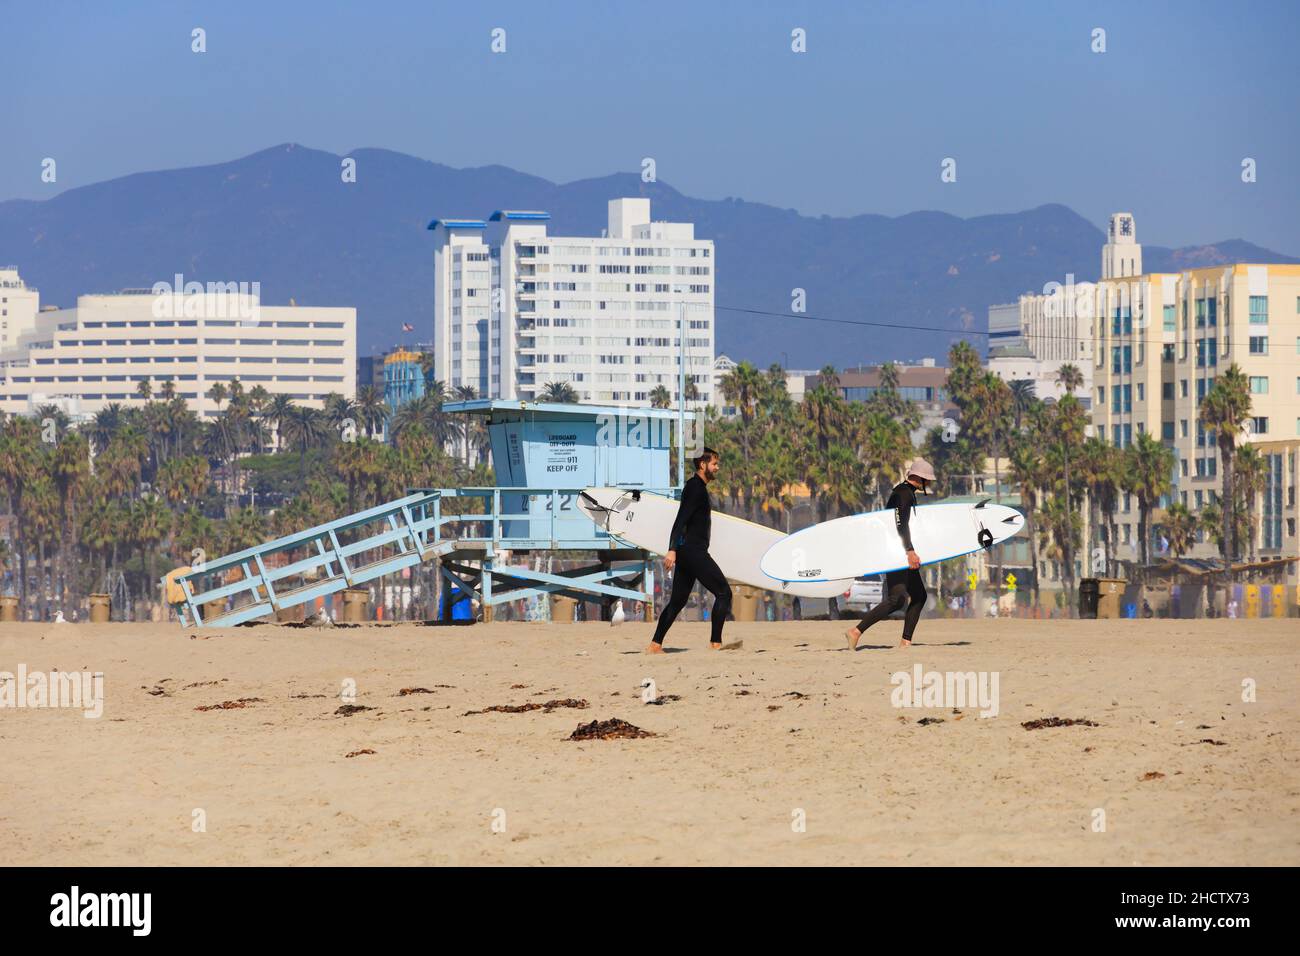 Surfers walk up the beach in front of a lifeguard hut at Santa Monica, California, United States of America. Downtown hotels in the background Stock Photo